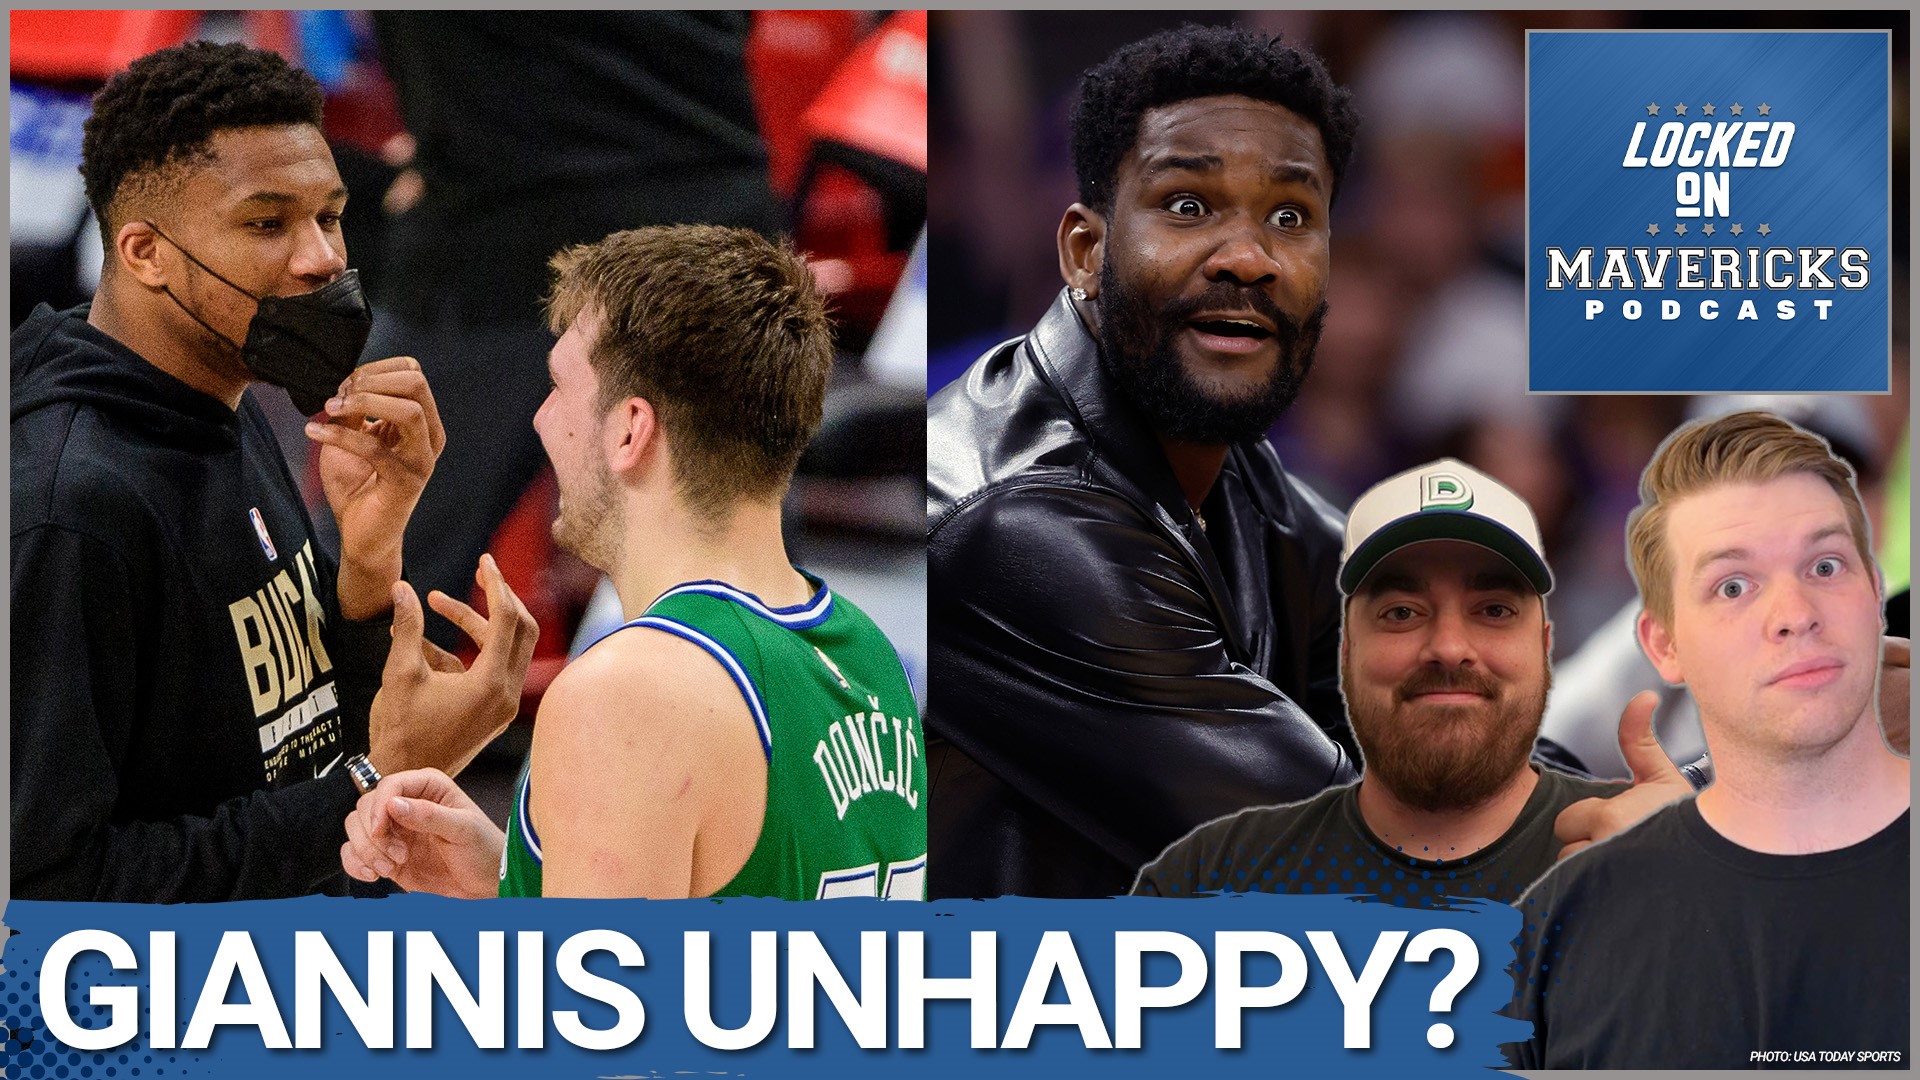 Nick Angstadt & Isaac Harris discuss Giannis Antetokounmpo's comments about staying in Milwaukee or not. Could the Dallas Mavericks & Luka Doncic lure him away?